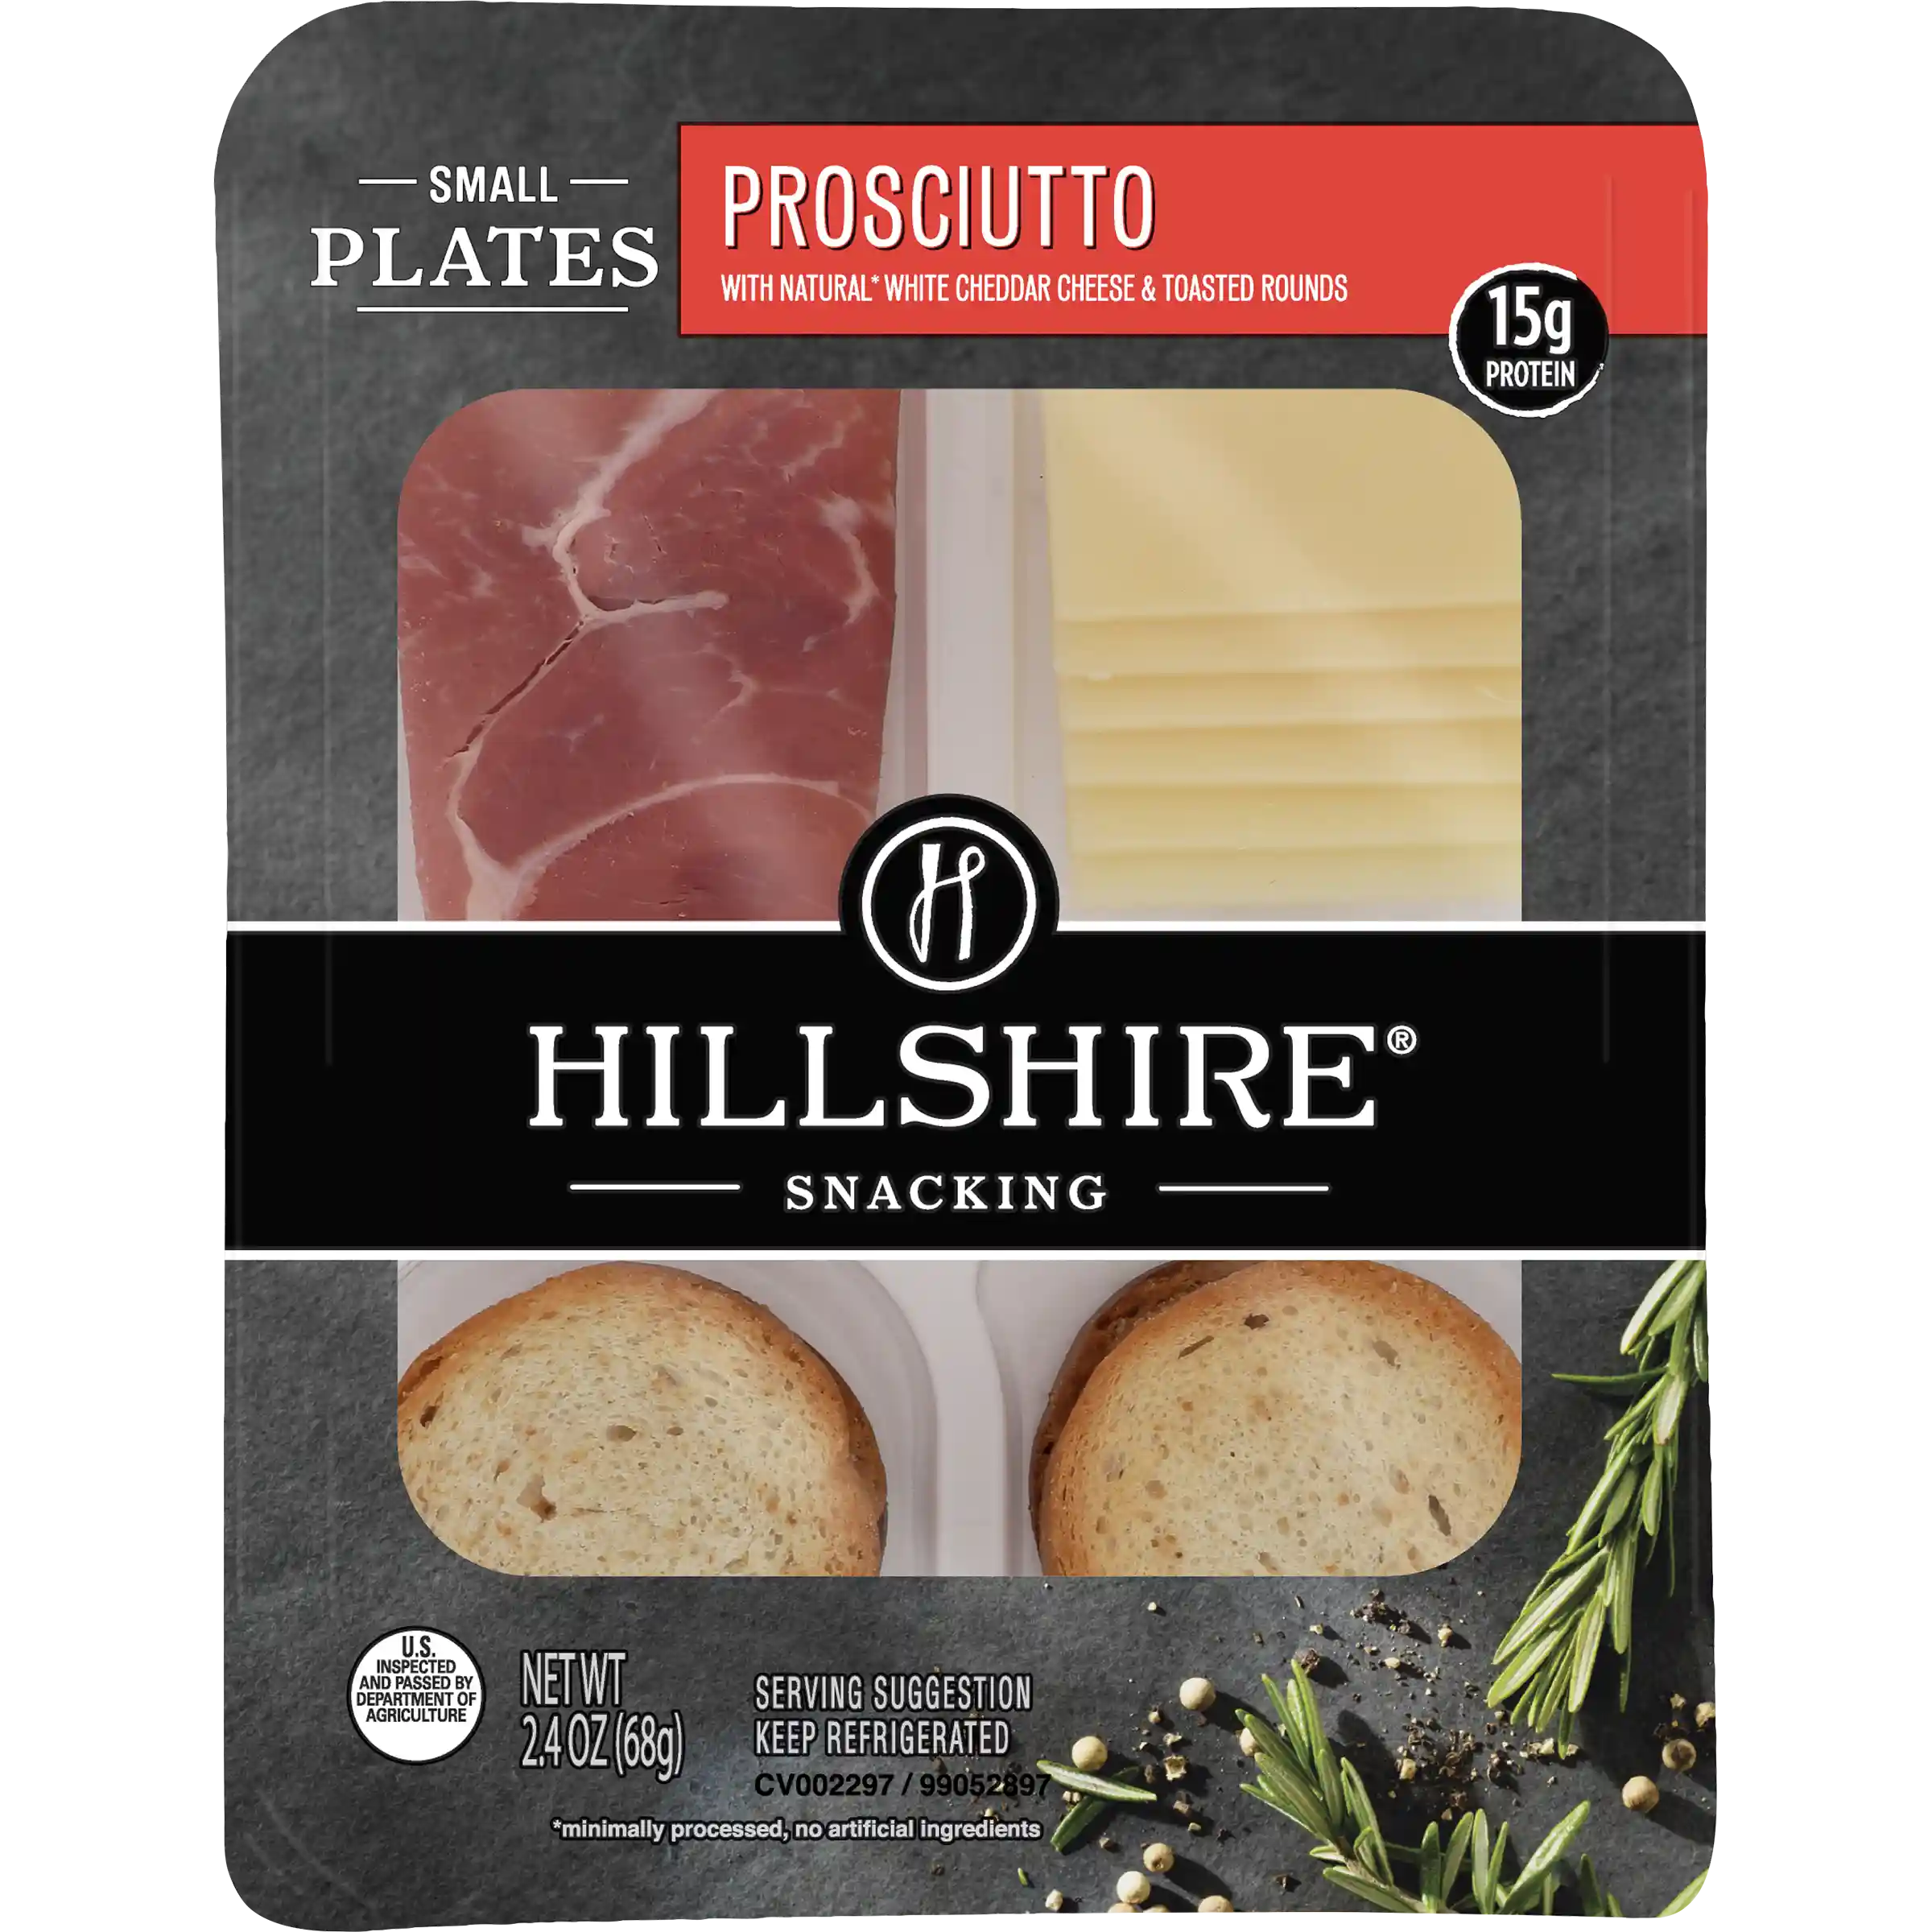 Hillshire® Snacking Small Plates, Prosciutto Deli Lunch Meat with White Cheddar Cheese, 2.4 oz_image_11